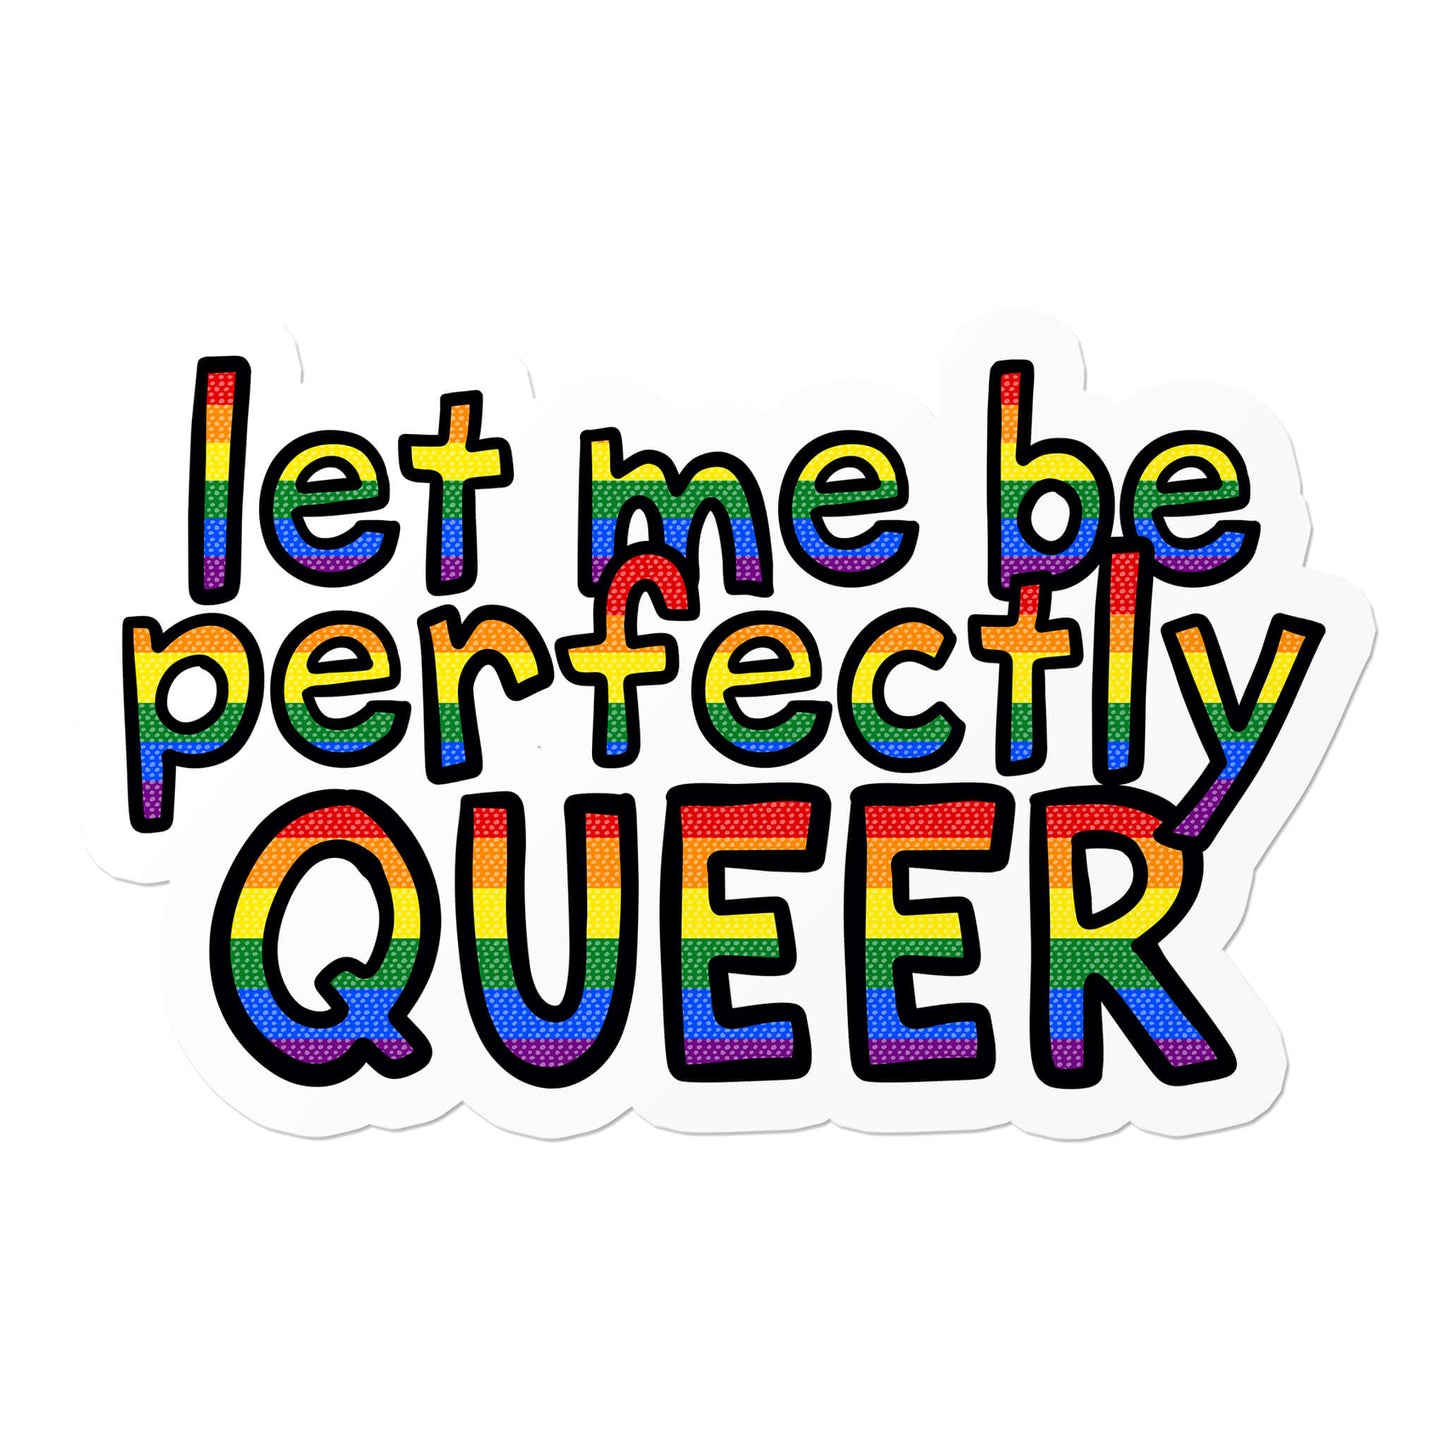 Let Me Be Perfectly Queer Sticker